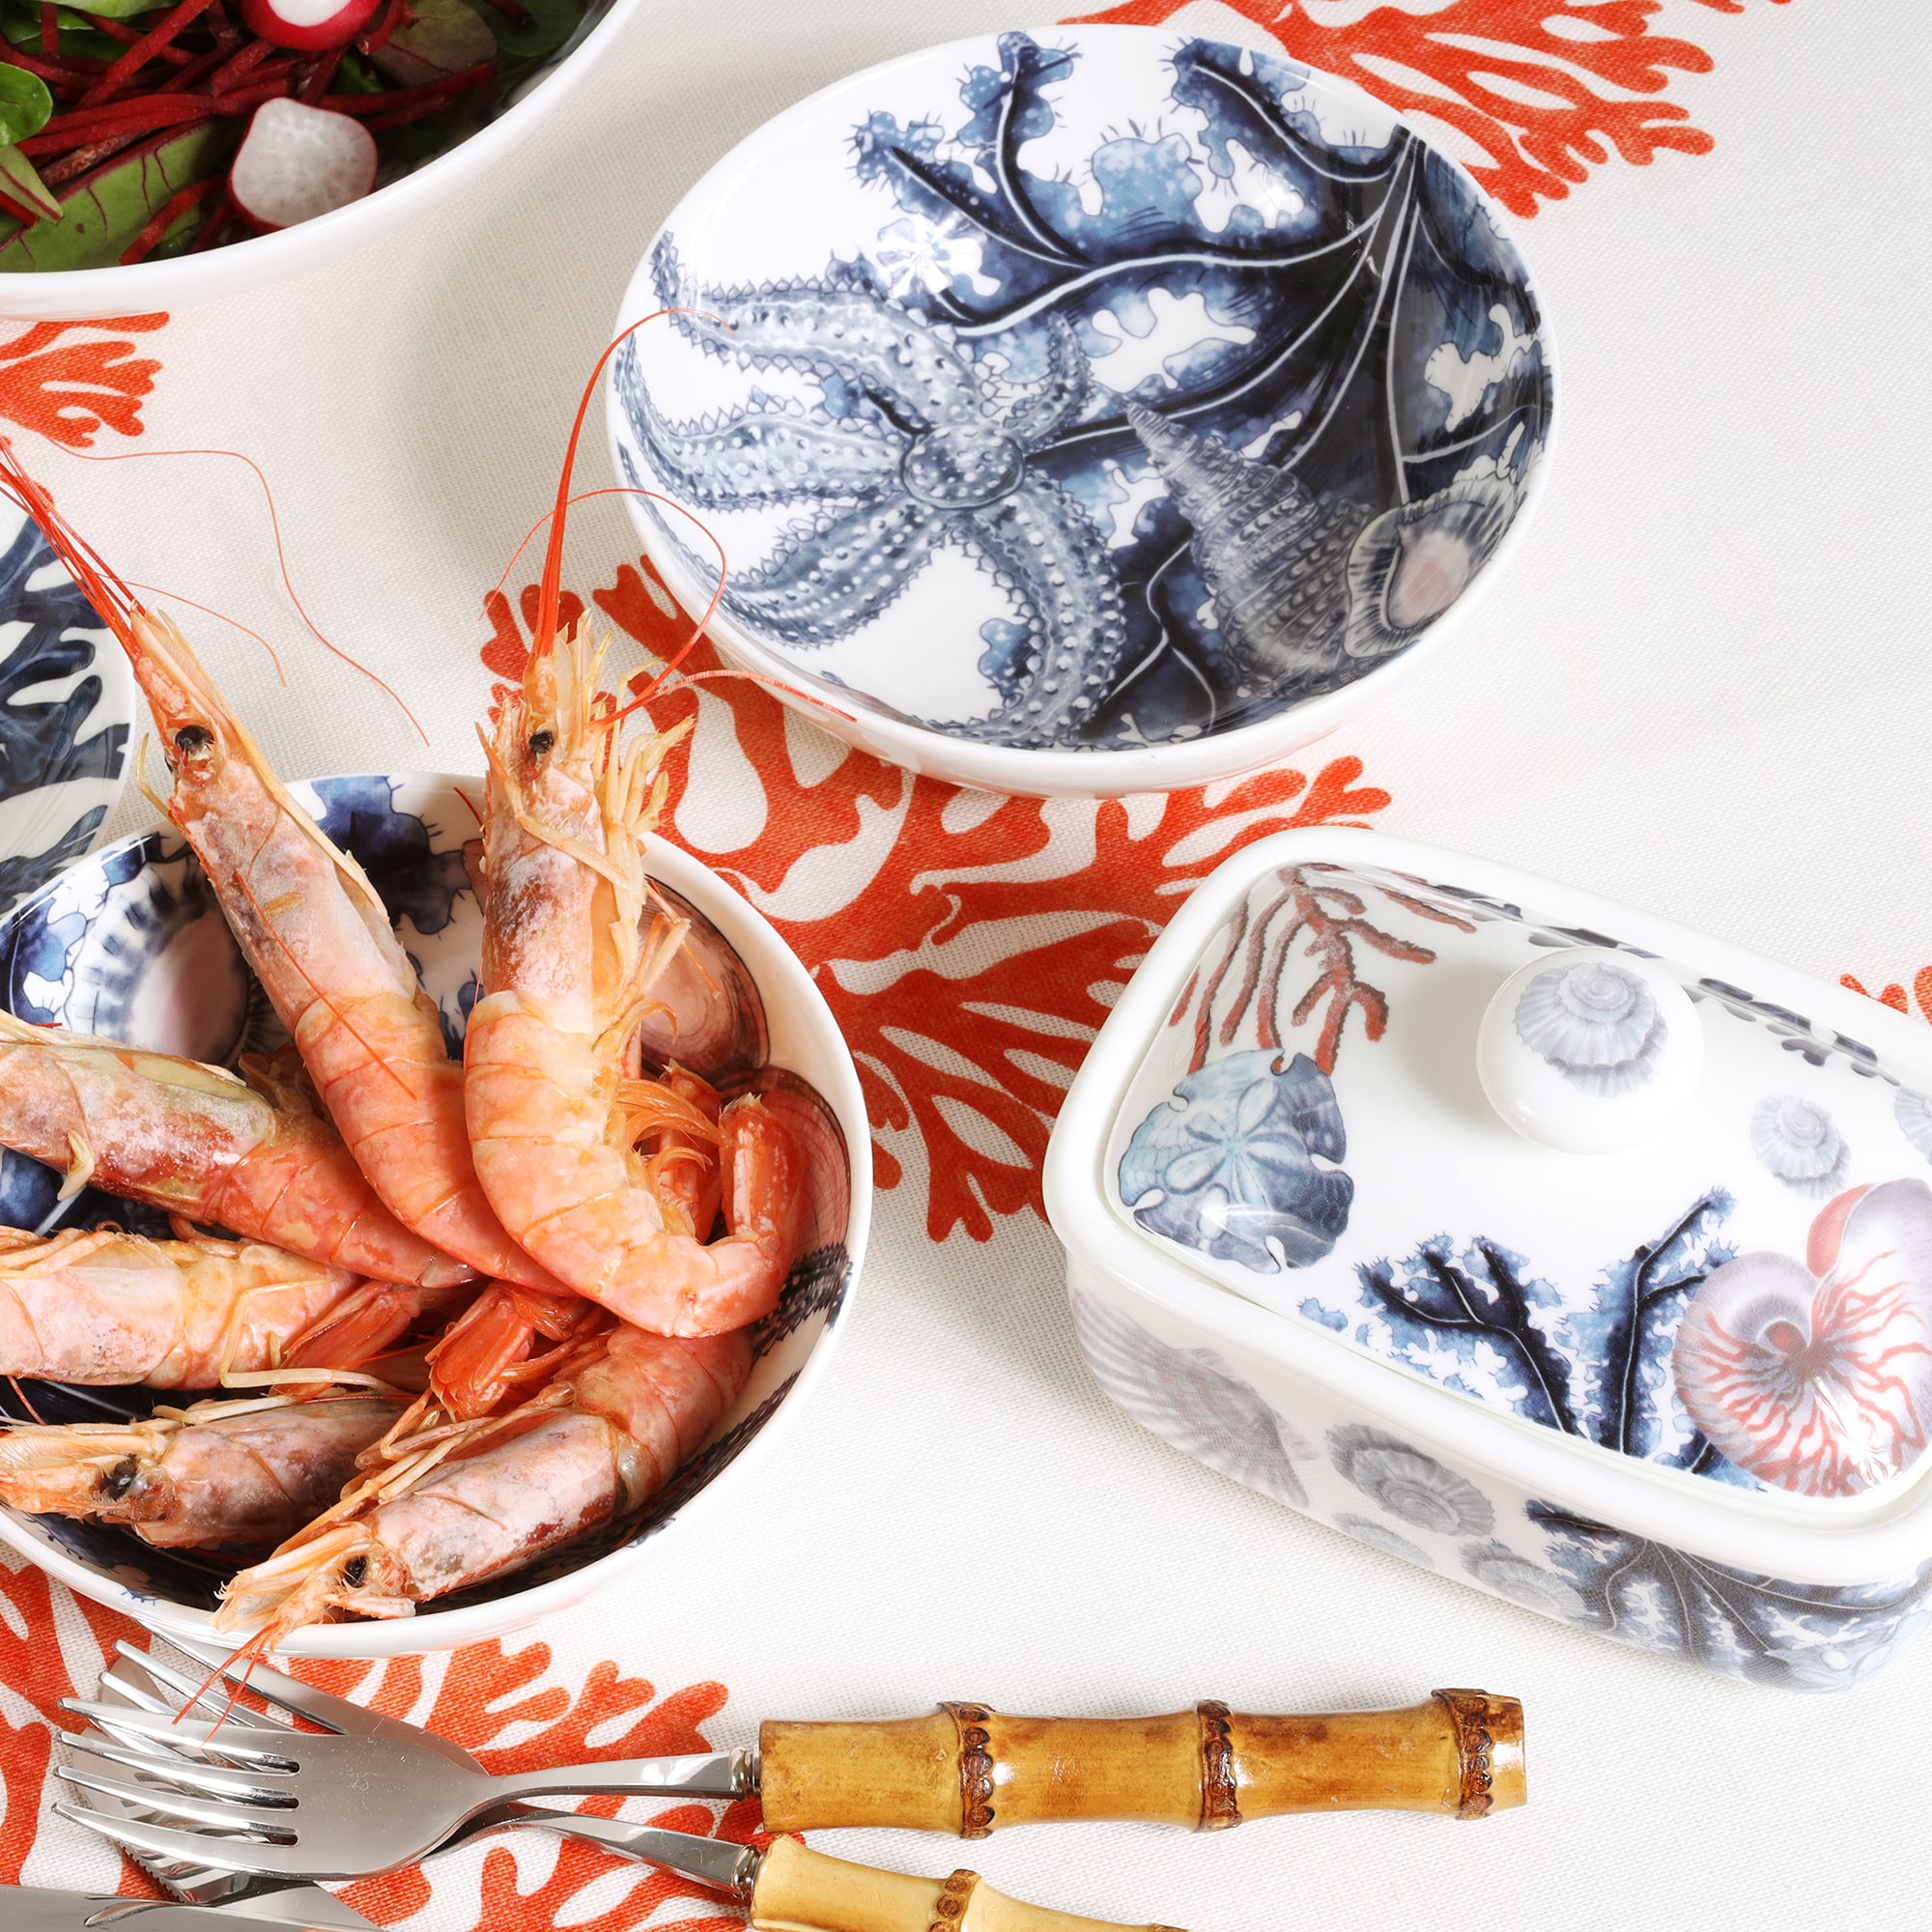 Butter dish in our Beachcomber range,with shells,seaweed and other sea themed designs all over the base and the lid.Also on the table are a couple of matching beachcomber bowls on a table cloth.In the bowls are prawns and a salad